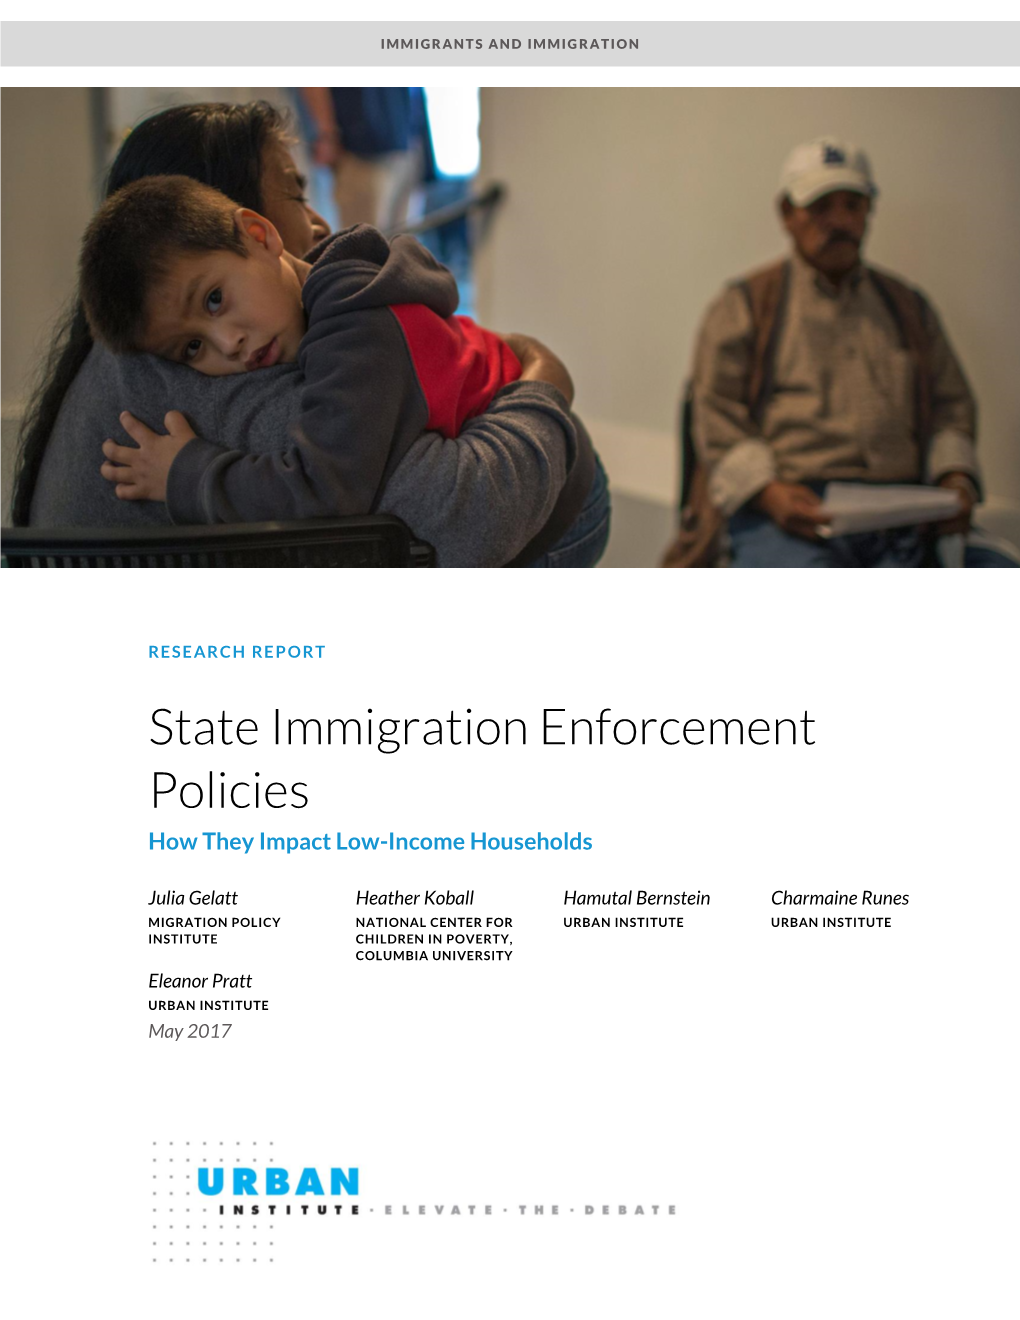 State Immigration Enforcement Policies How They Impact Low-Income Households